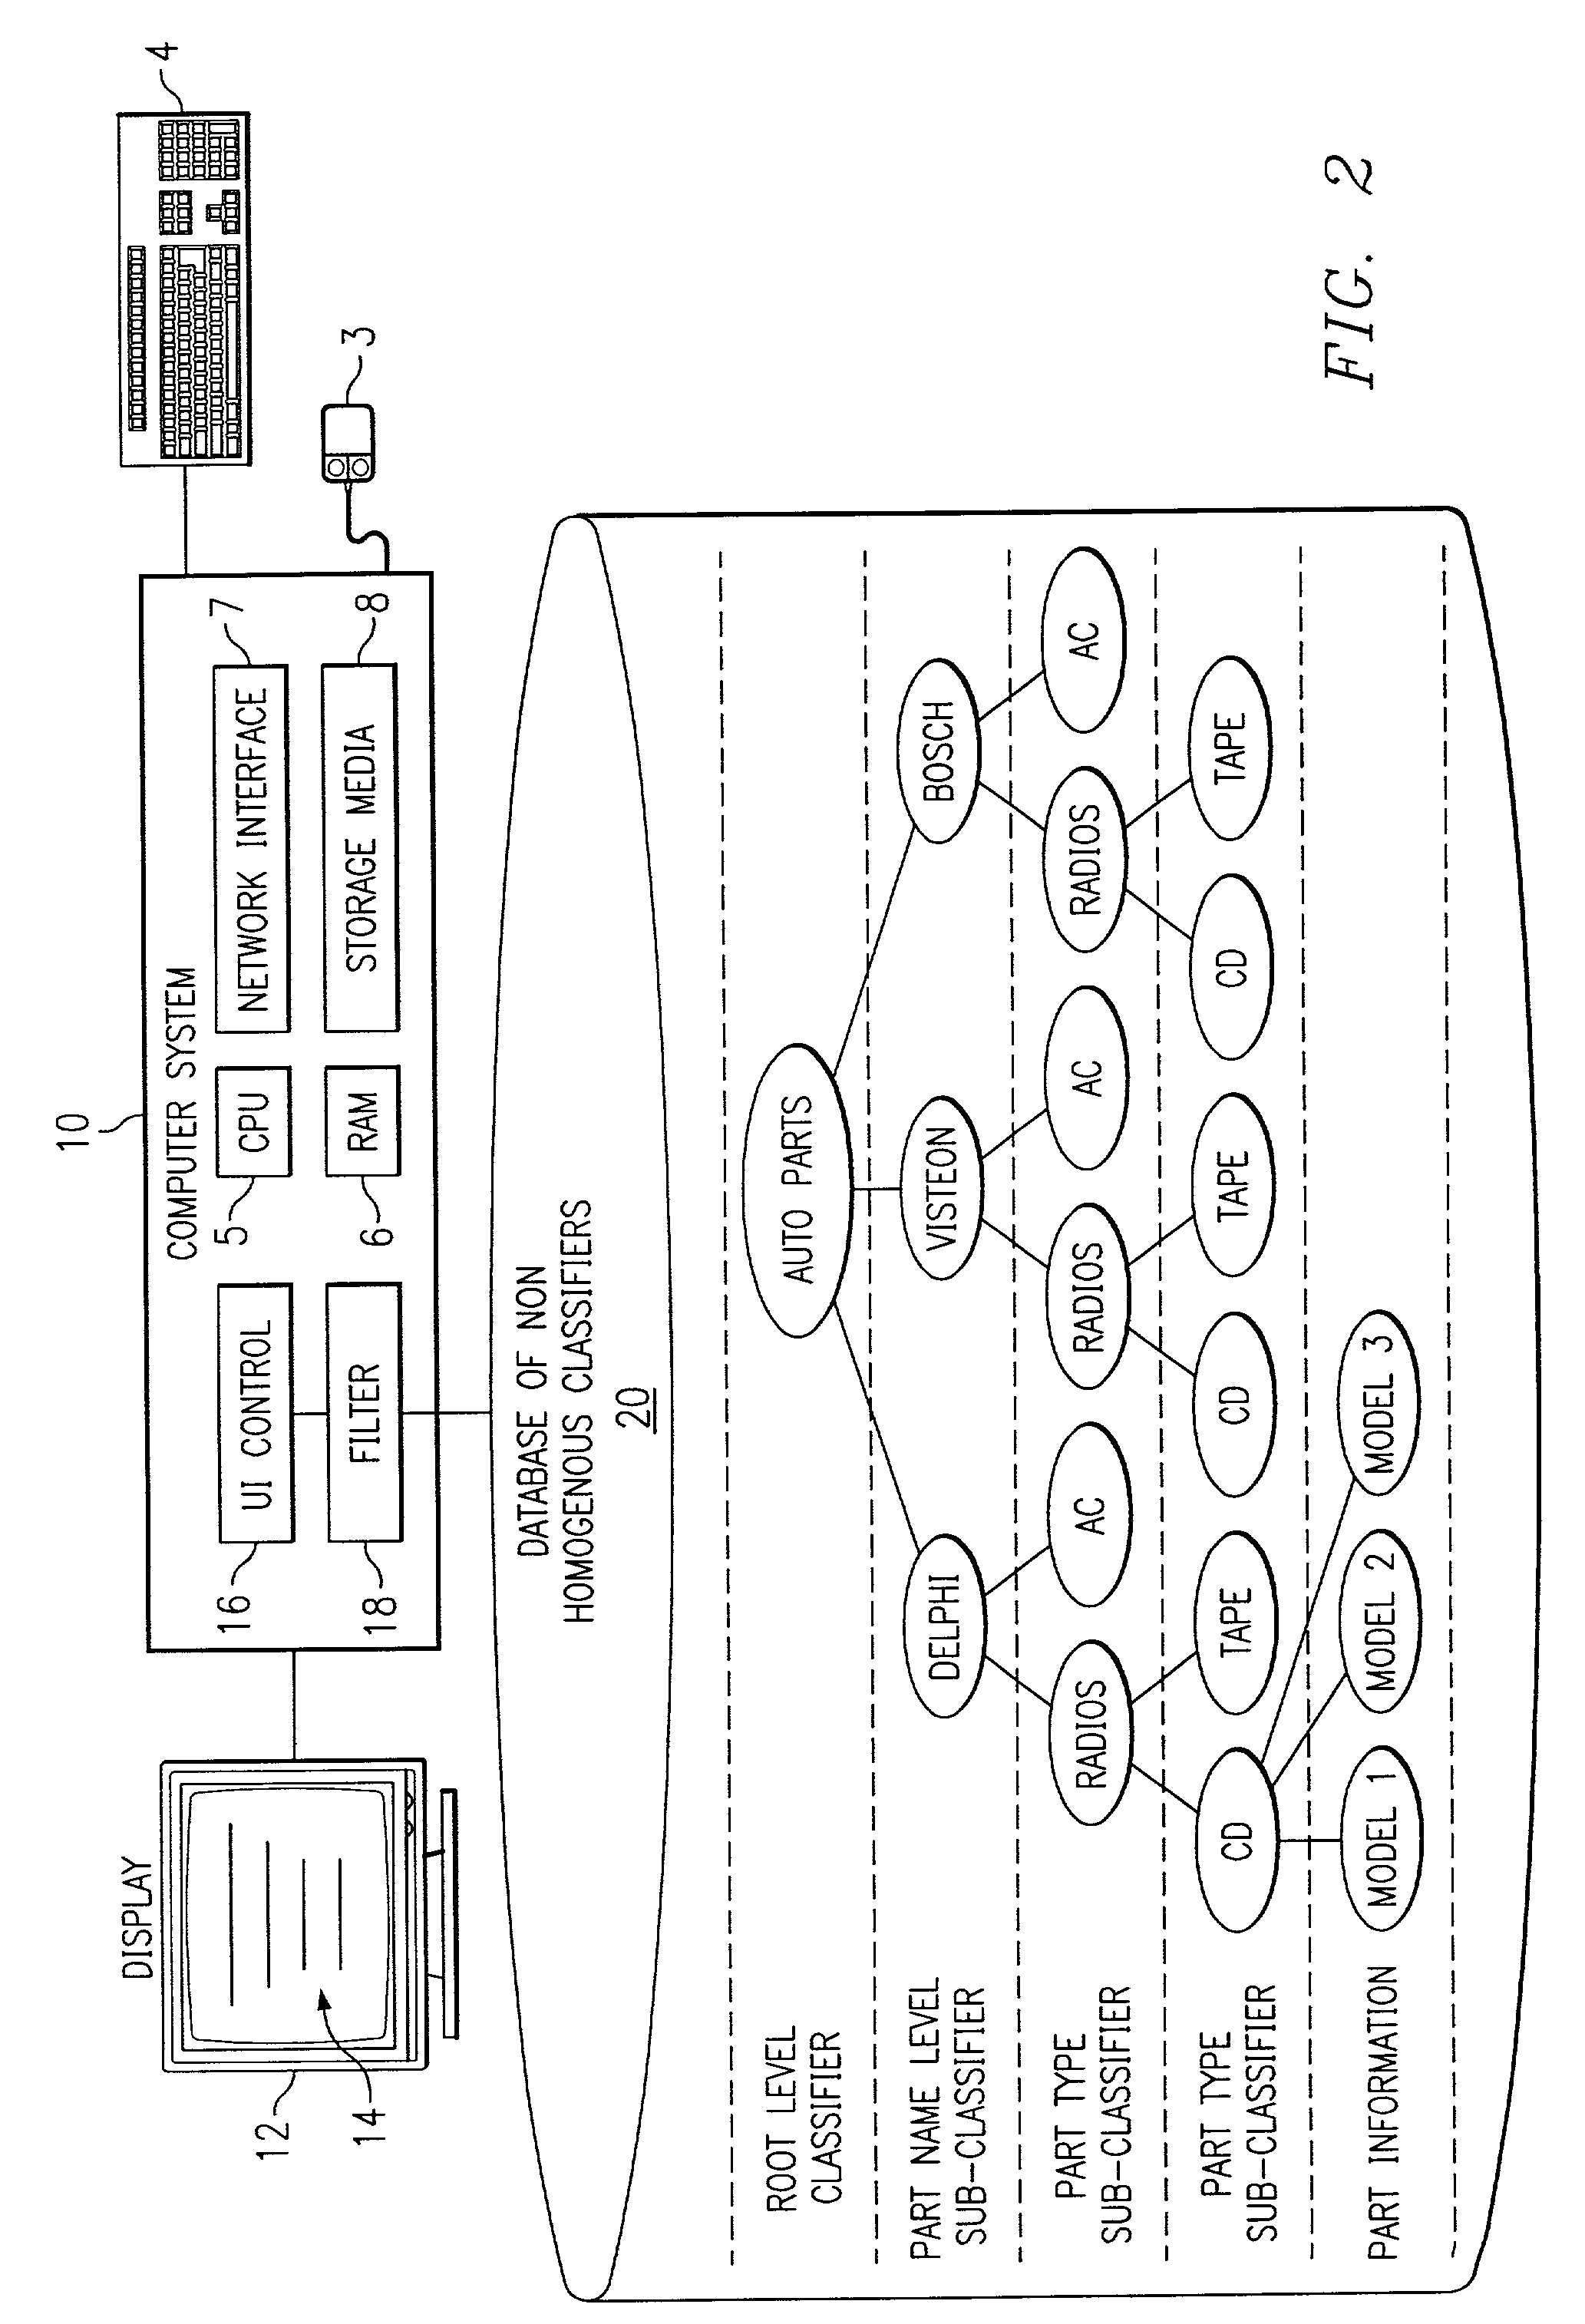 System and method for presenting information organized by hierarchical levels